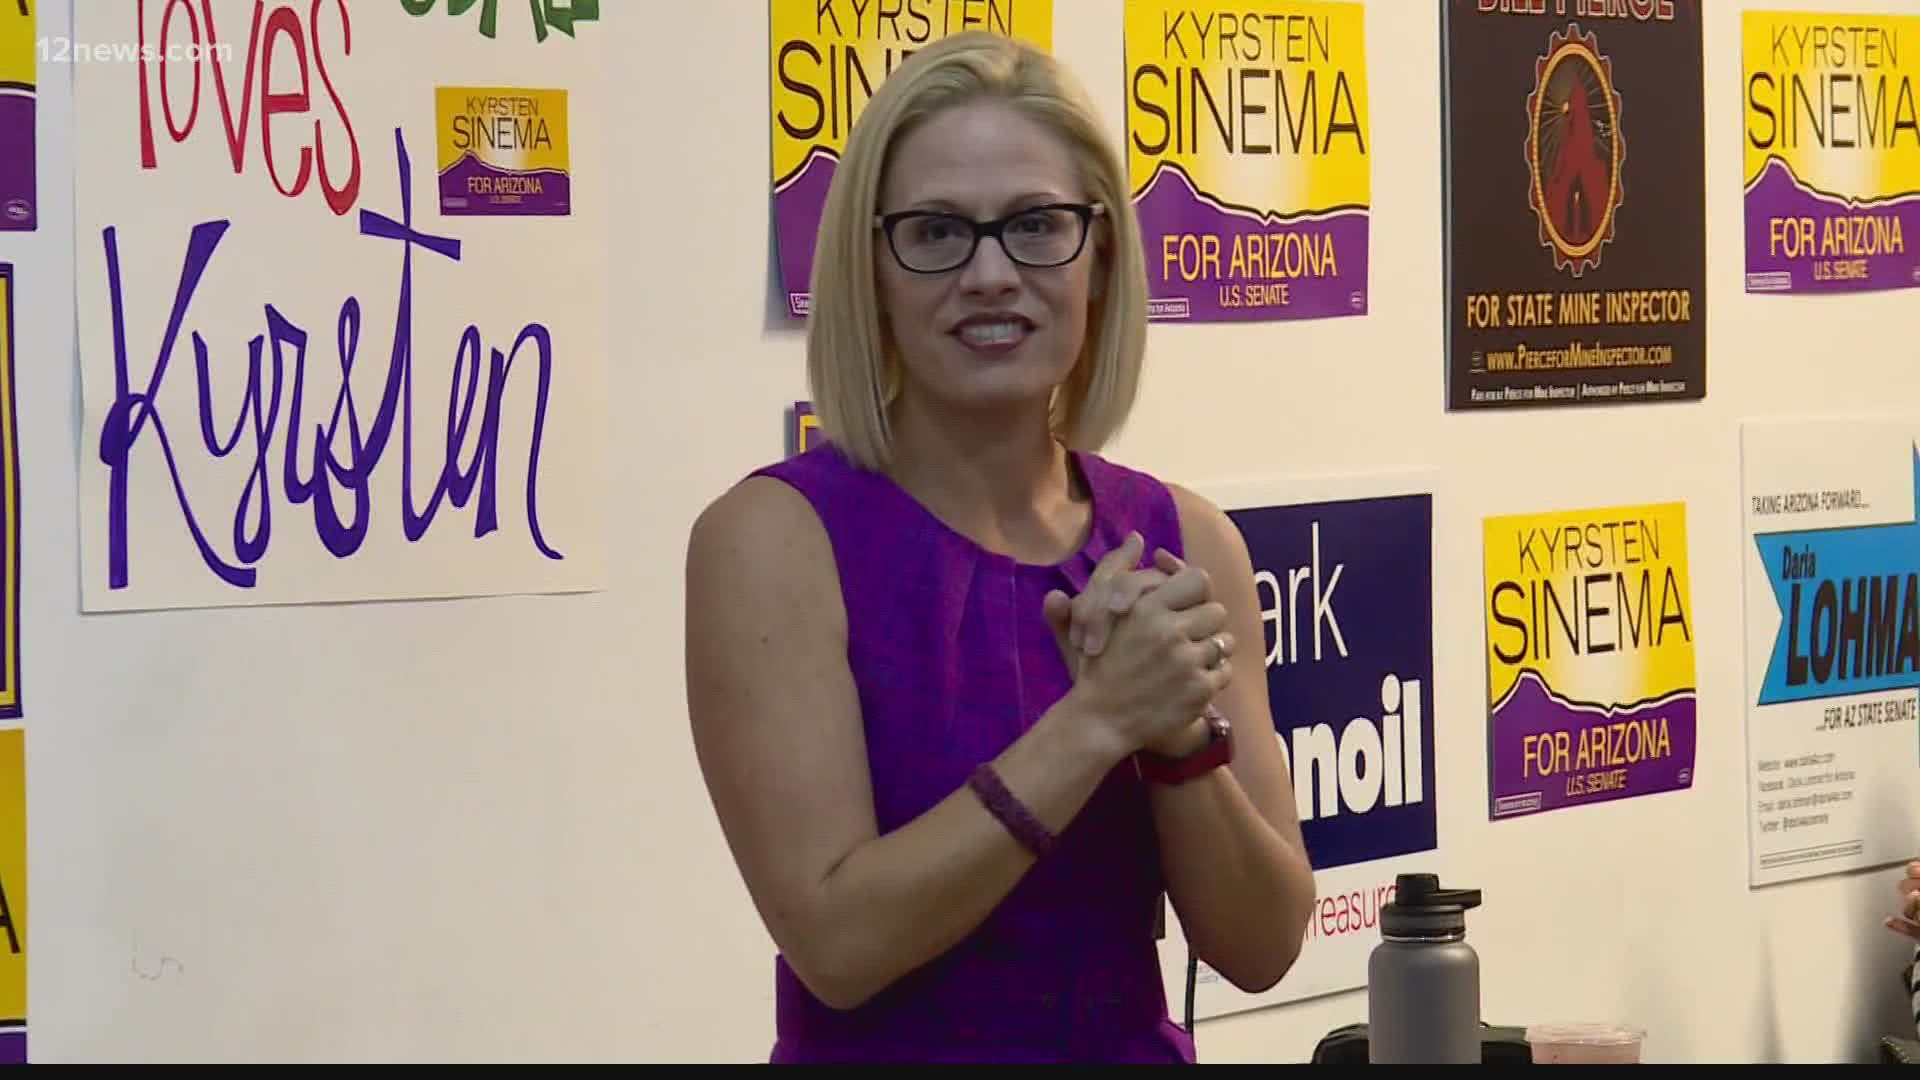 Senator Sinema is being hounded by critics who say she is standing in the way of President Biden's agenda. There are signs that the pressure is working.